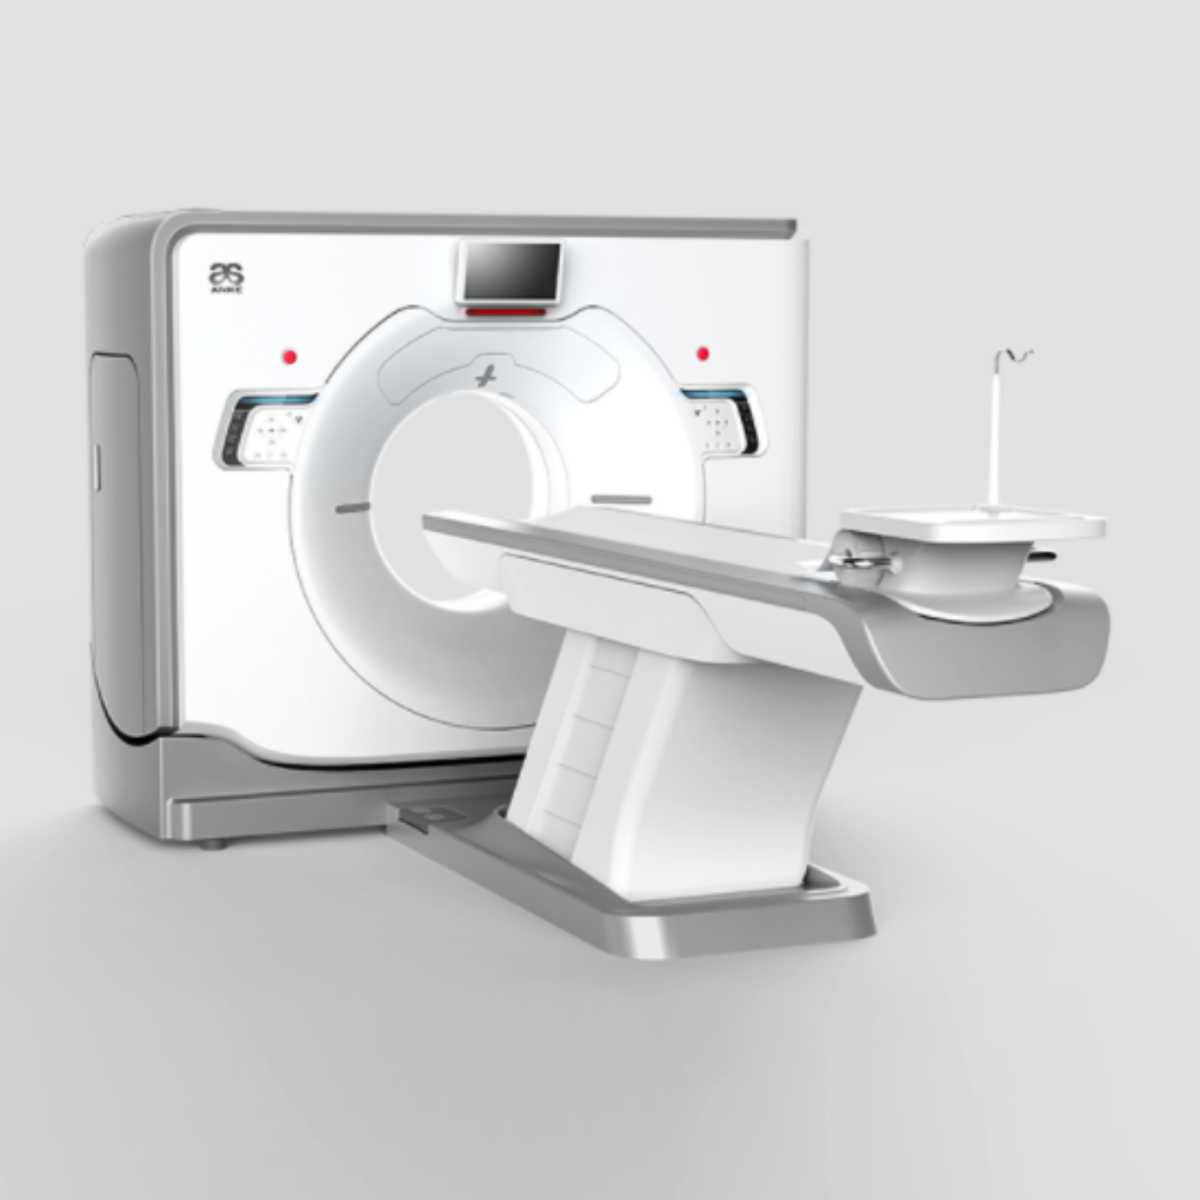 CT scanner - AG-CT16 - Jiangsu Aegean Technology - for whole-body